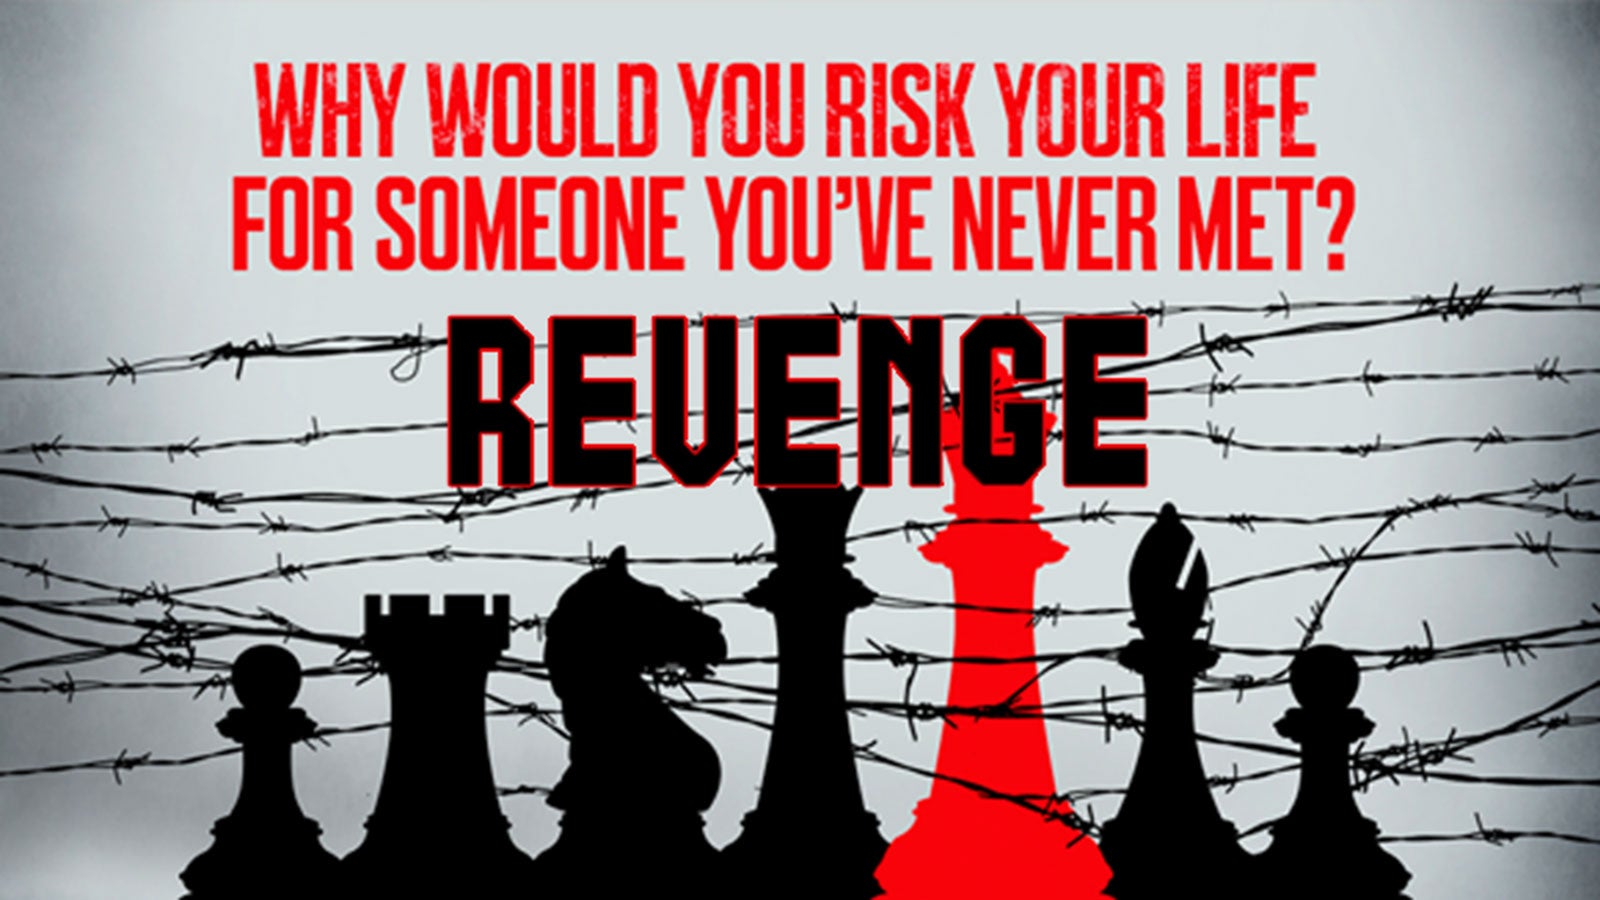 Why would you risk your life for someone you've never met? Revenge. Chess pieces in barbed wire